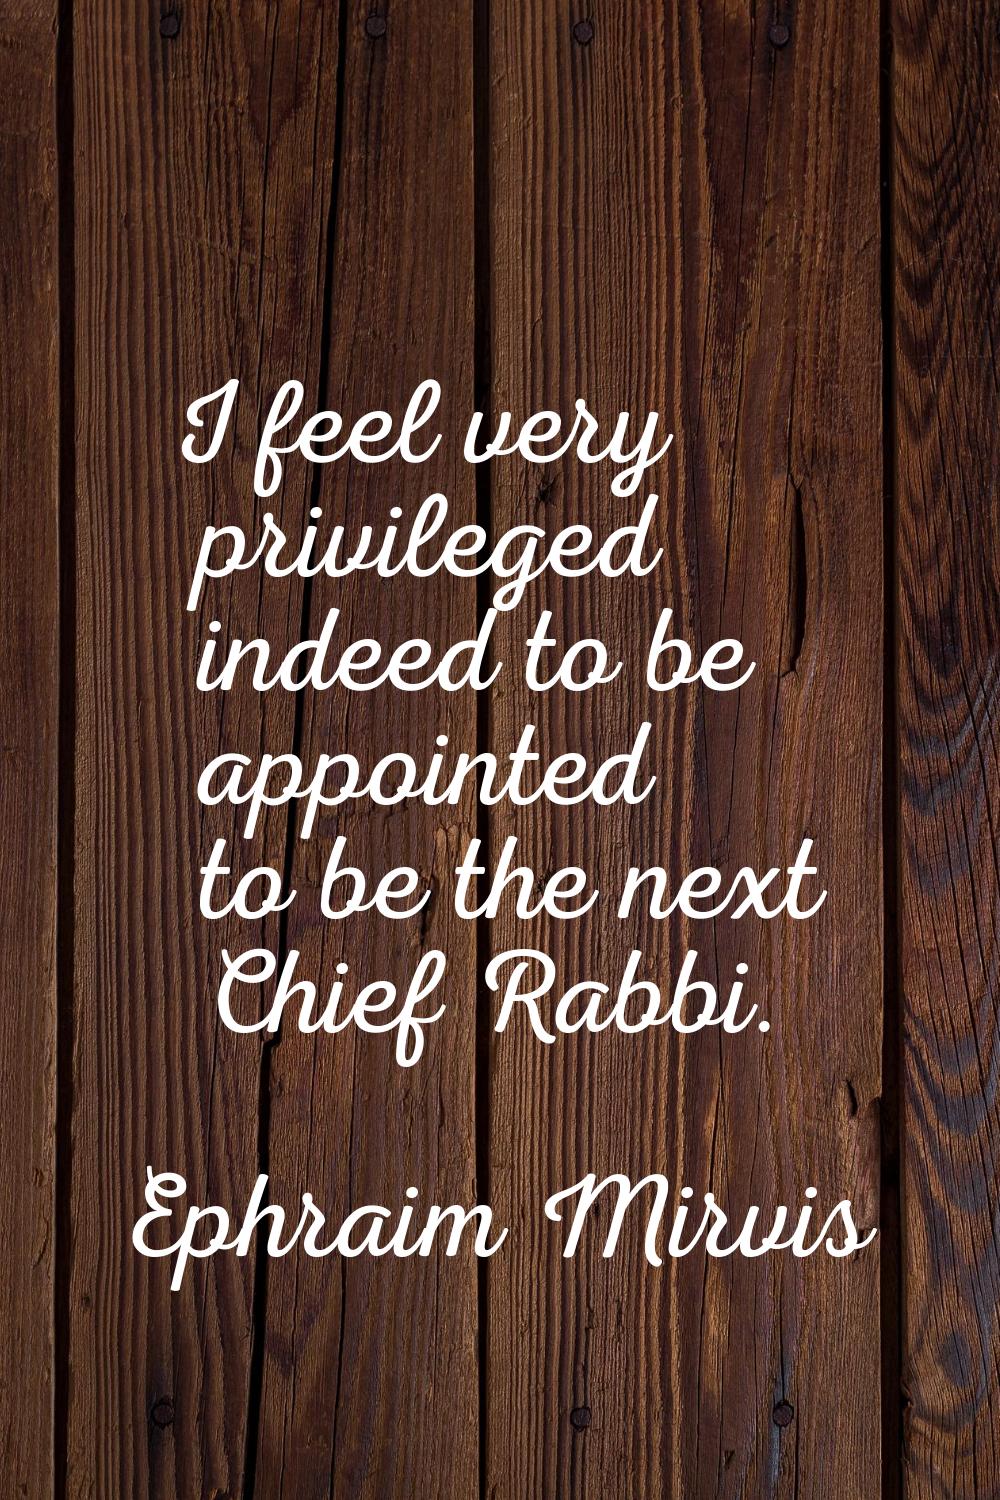 I feel very privileged indeed to be appointed to be the next Chief Rabbi.